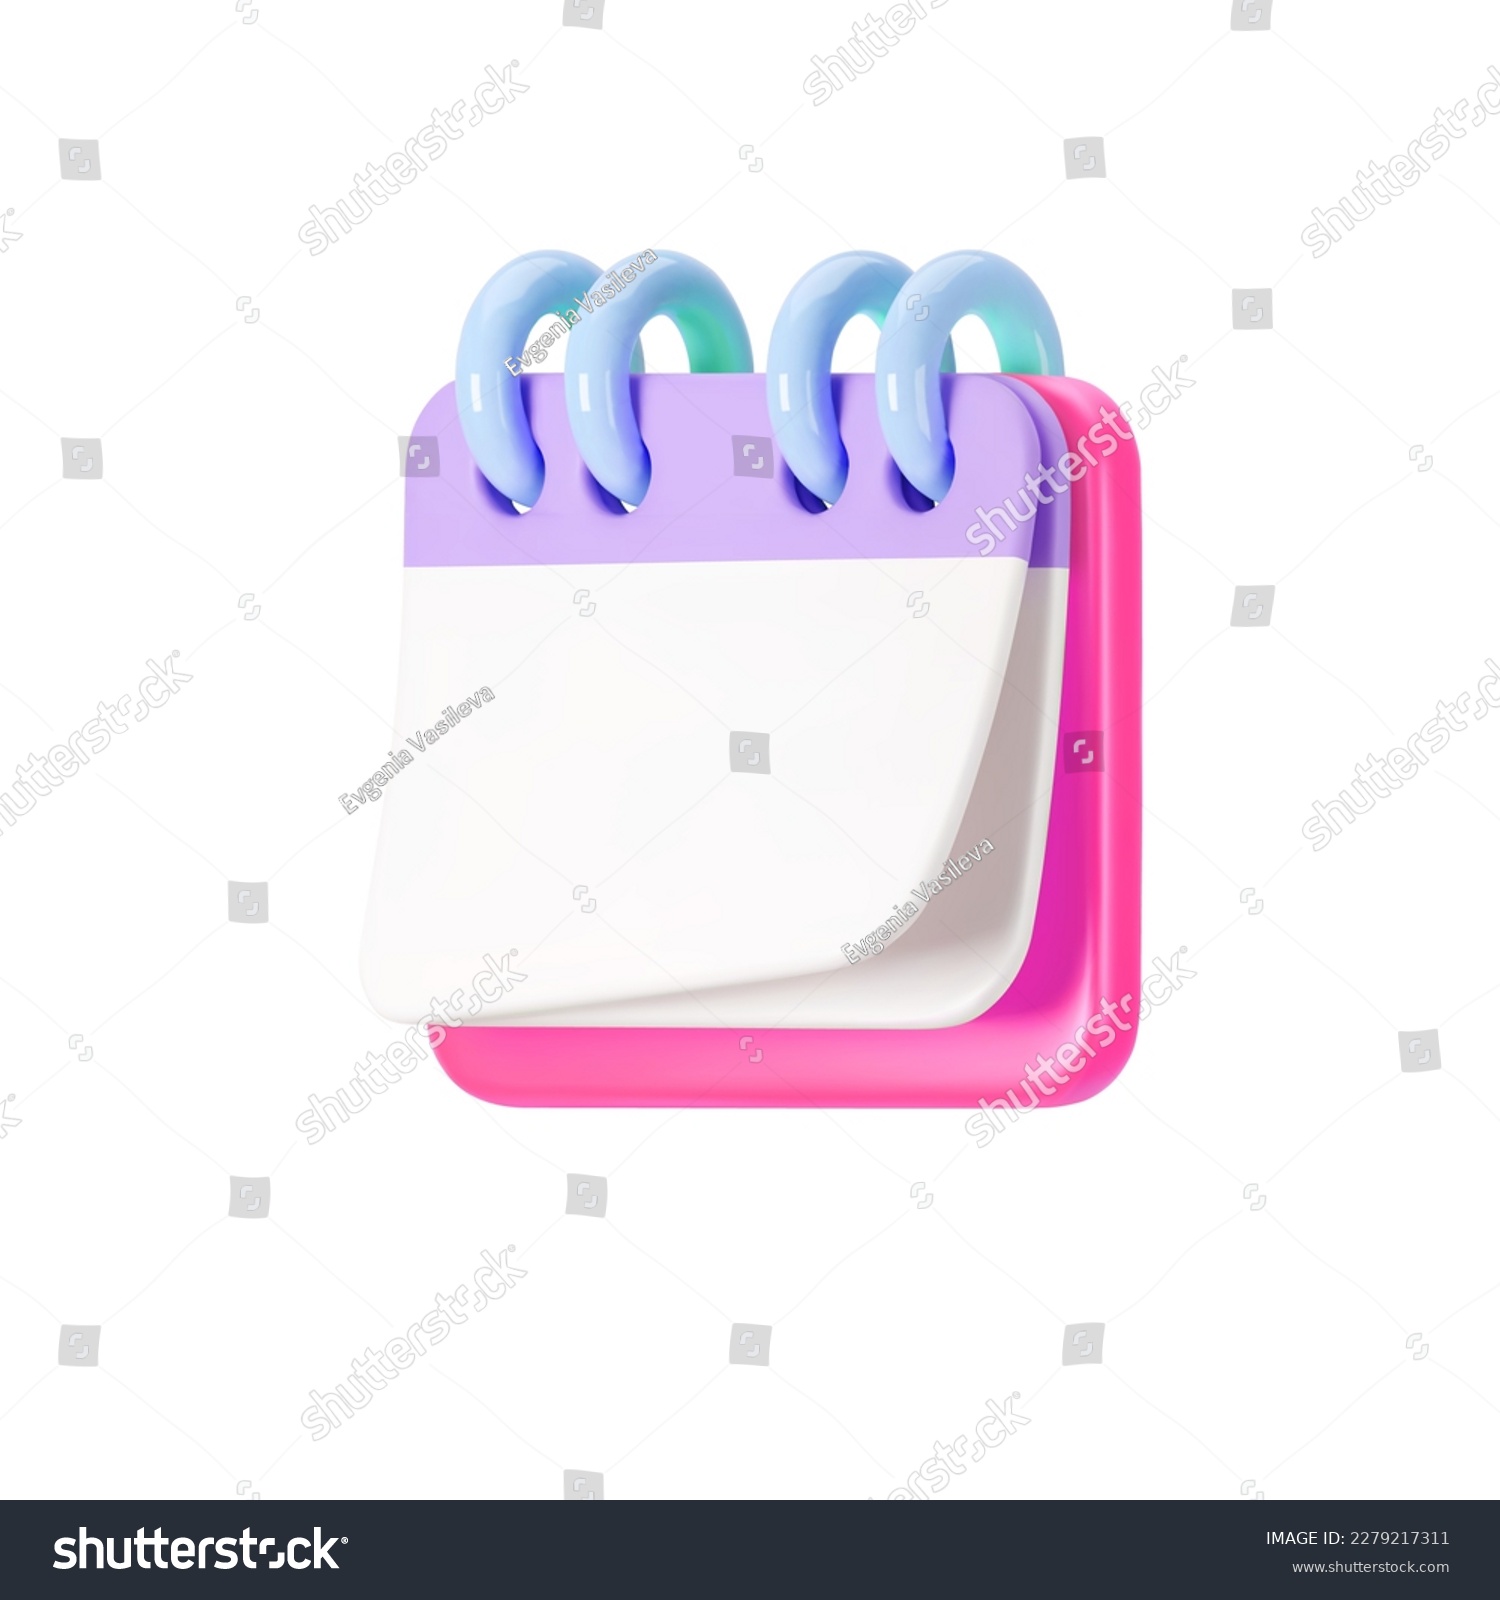 SVG of 3d pink calendar icon with flipping pages and rings isolated on gray background. Render of daily schedule planner. Calendar events plan, work planning concept. 3d cartoon simple vector illustration svg